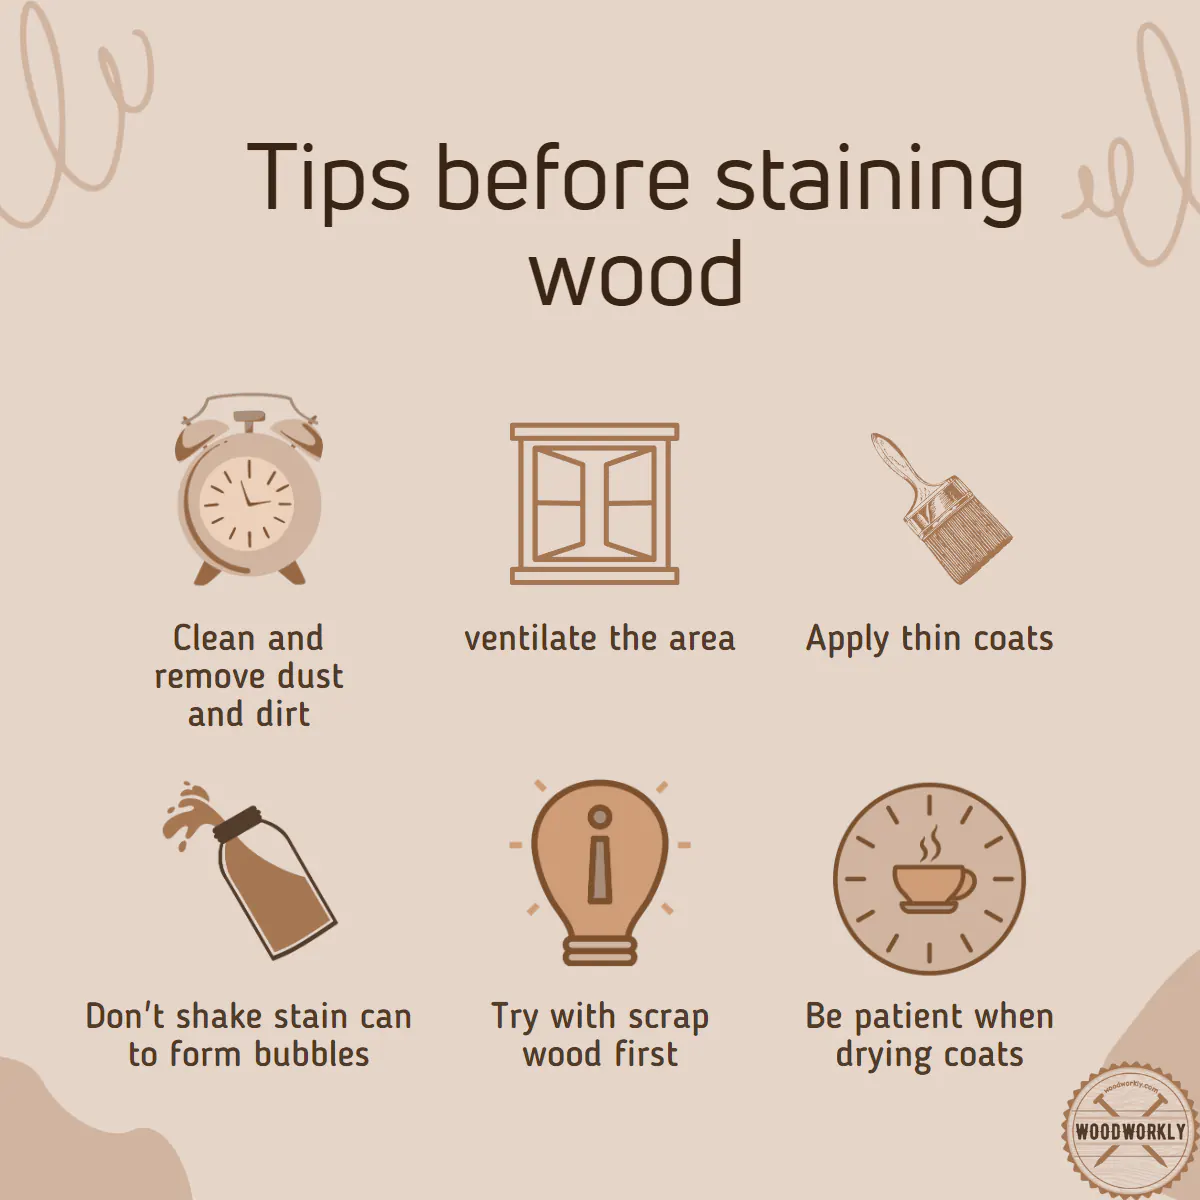 Tips before staining wood